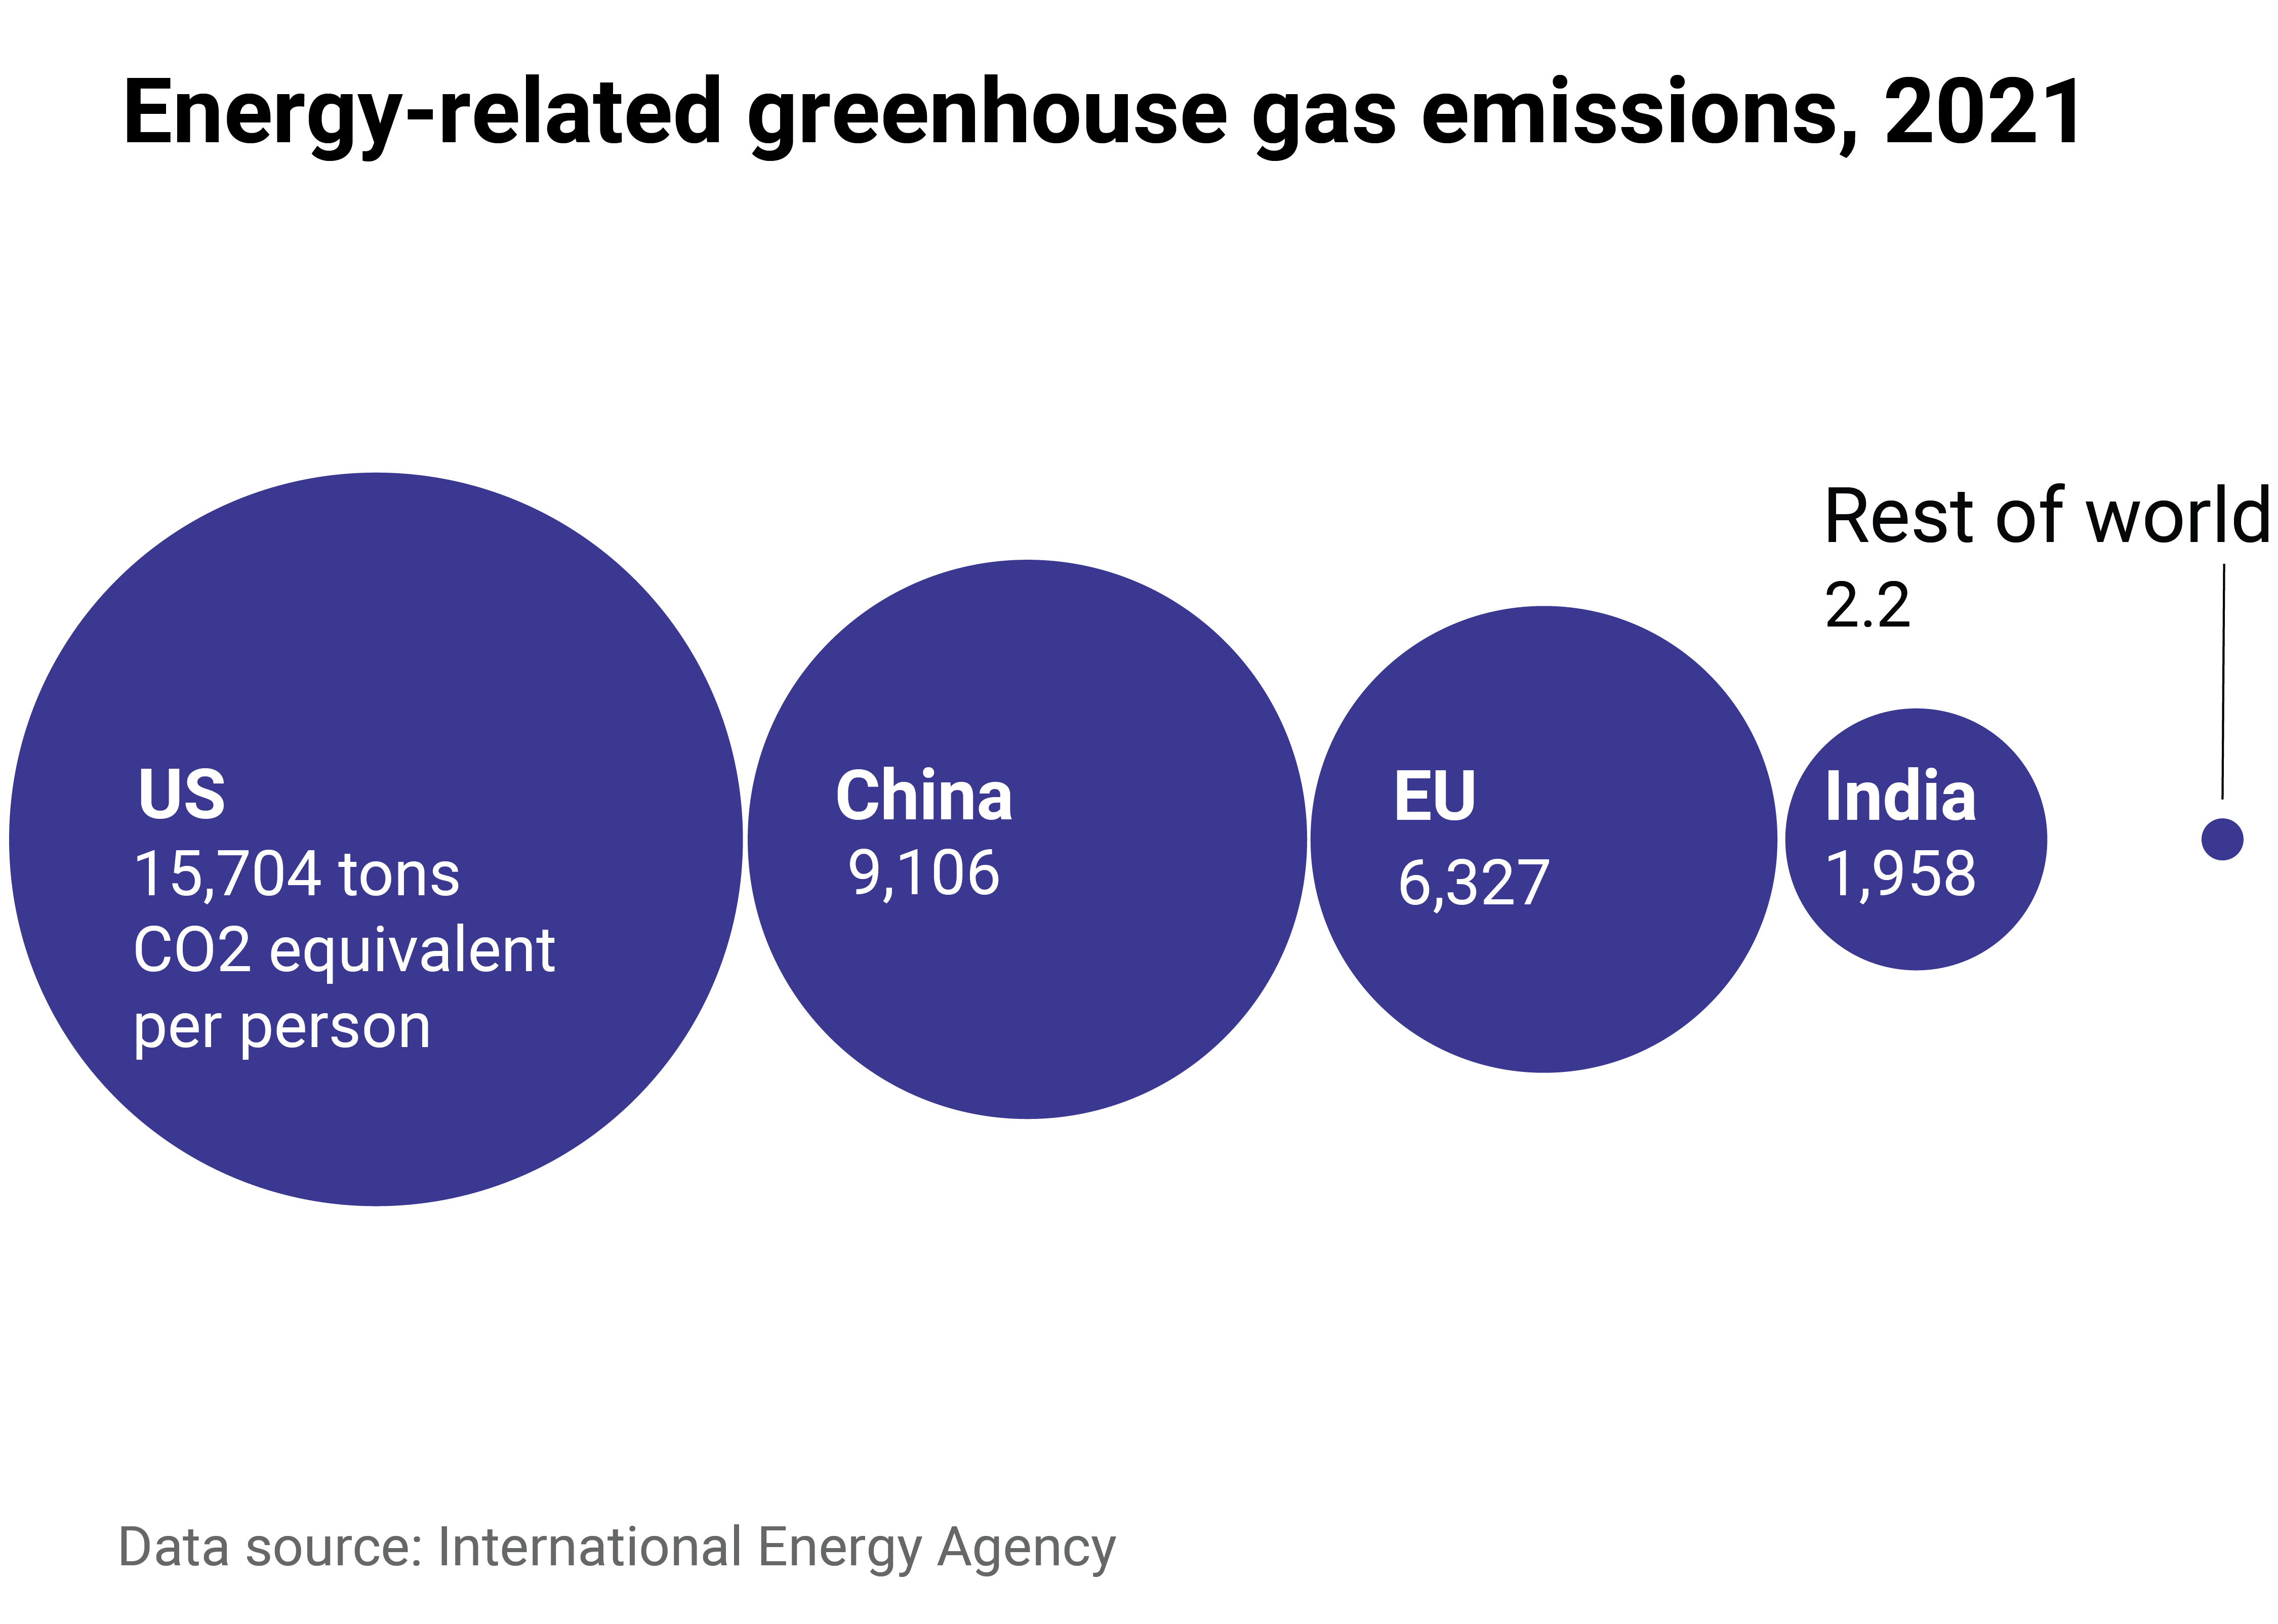 Bubble chart of the largest greenhouse gas emitters from energy, showing how disproportionate per capita emissions are in the US compared to other parts of the world